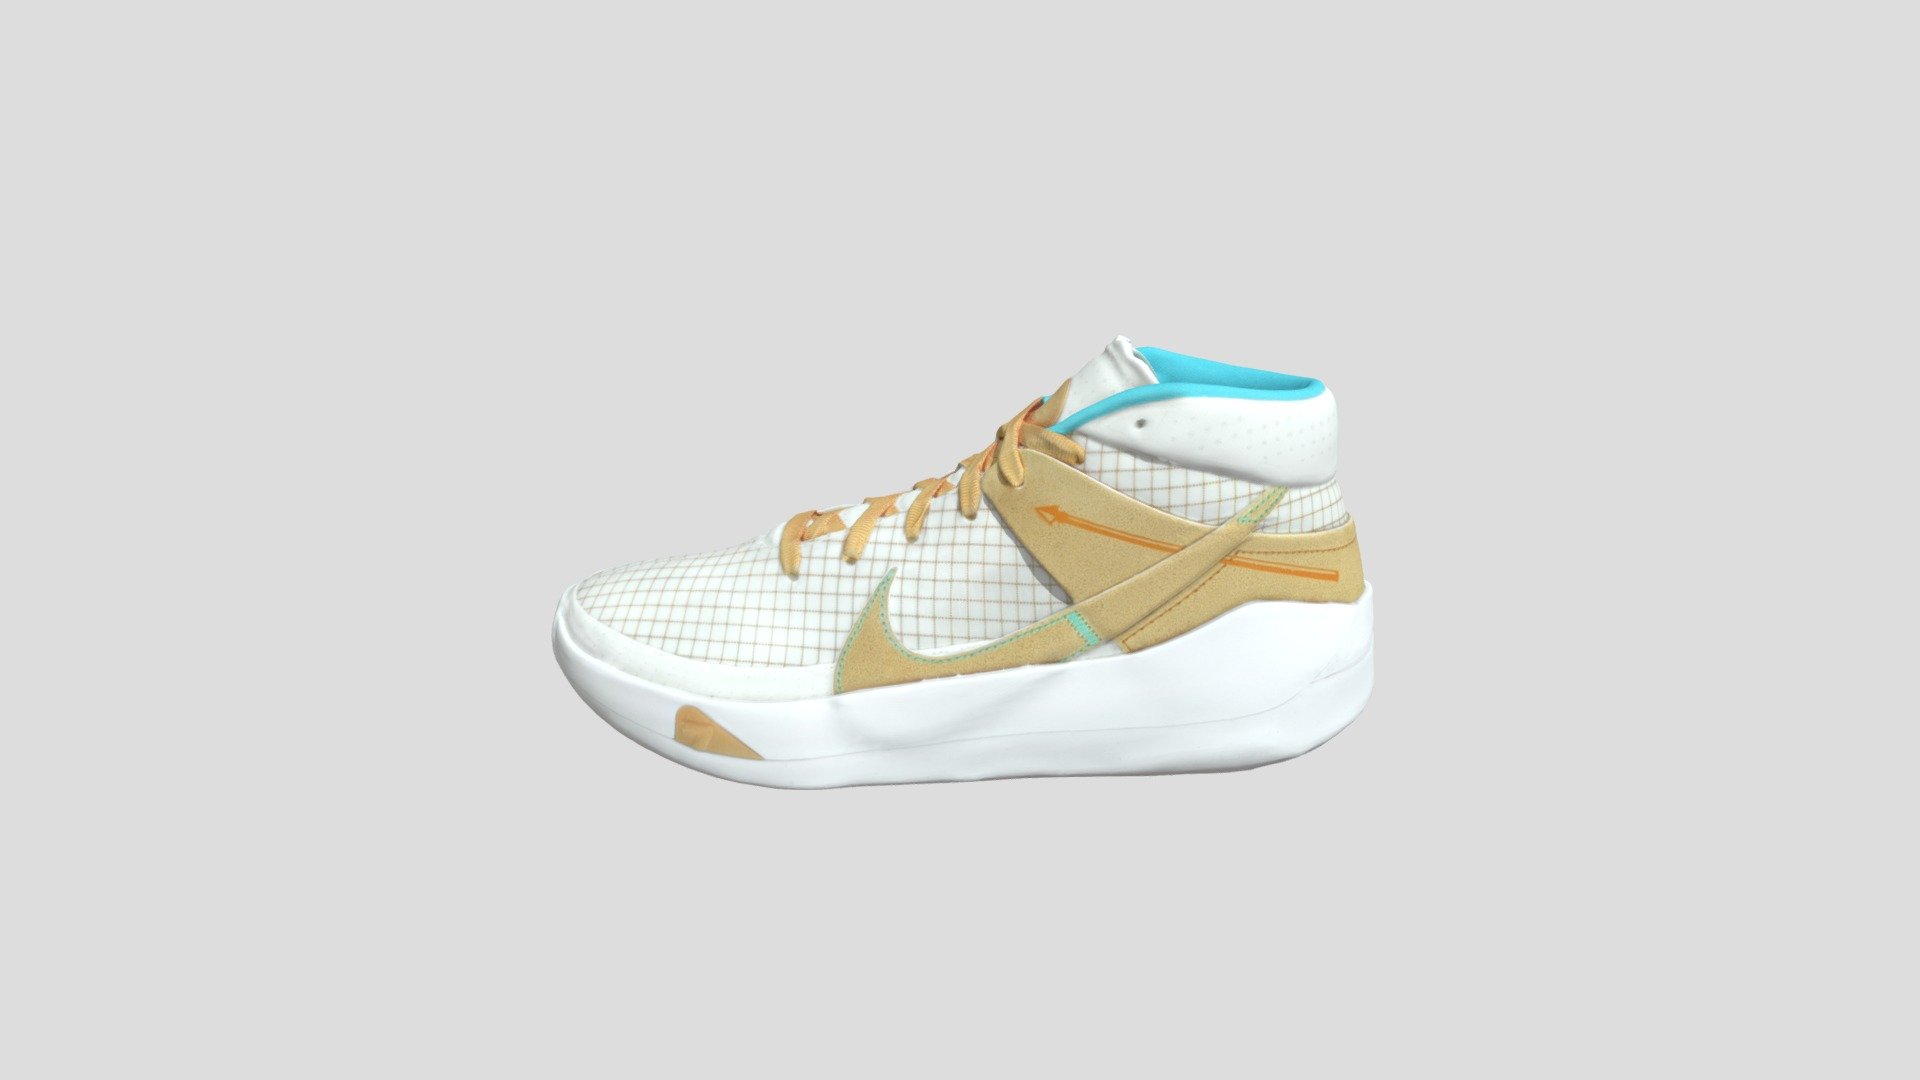 This model was created firstly by 3D scanning on retail version, and then being detail-improved manually, thus a 1:1 repulica of the original
PBR ready
Low-poly
4K texture
Welcome to check out other models we have to offer. And we do accept custom orders as well :) - Nike KD 13 EYBL 白金 国外版_DA0895-102 - Buy Royalty Free 3D model by TRARGUS 3d model